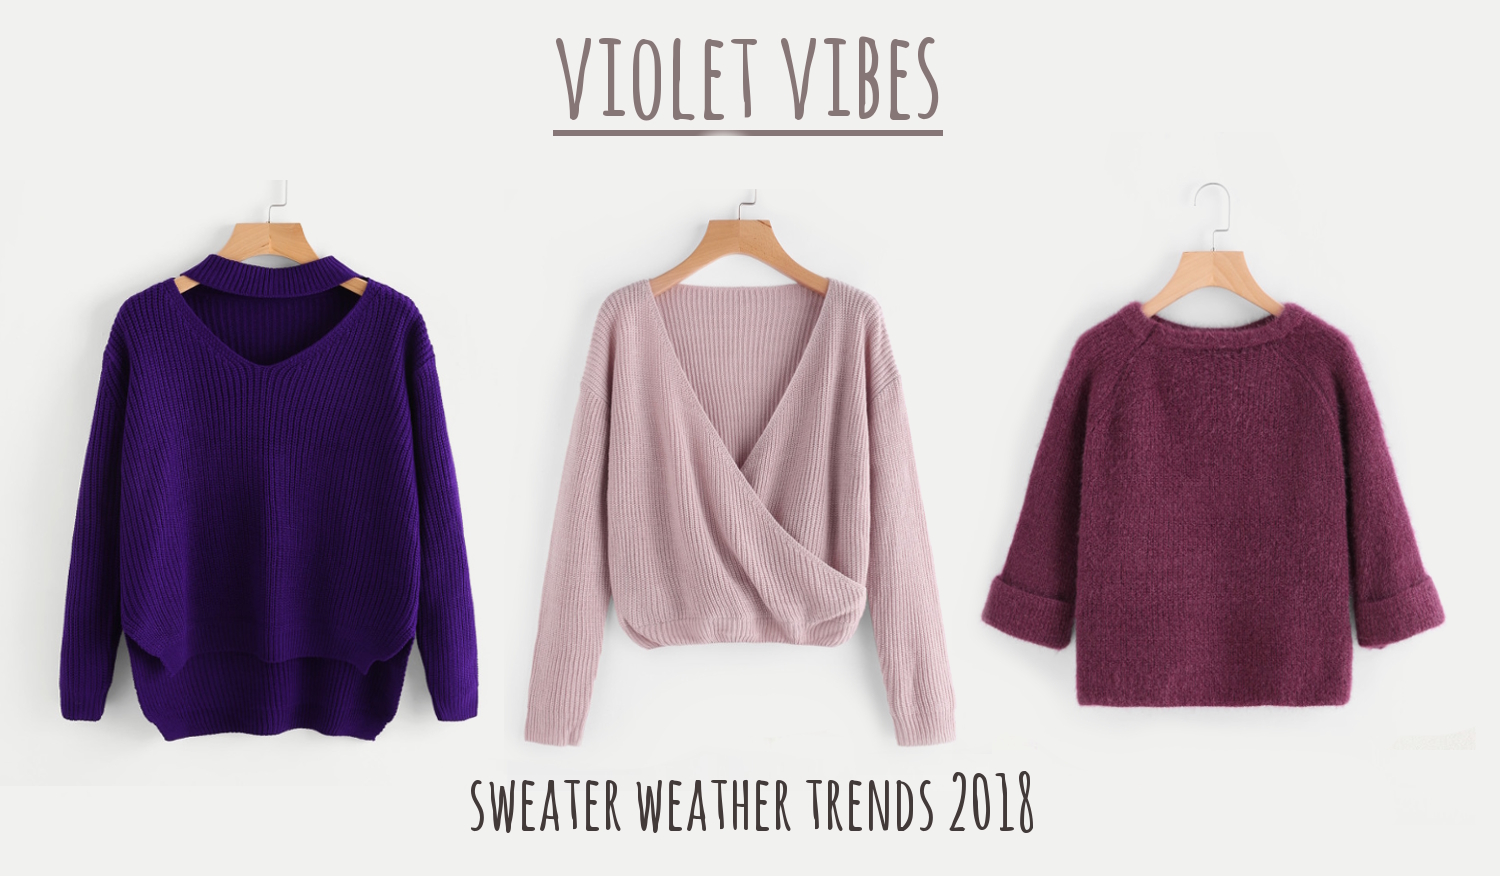 fashion collage with three trendy violet sweaters for sweater weather season